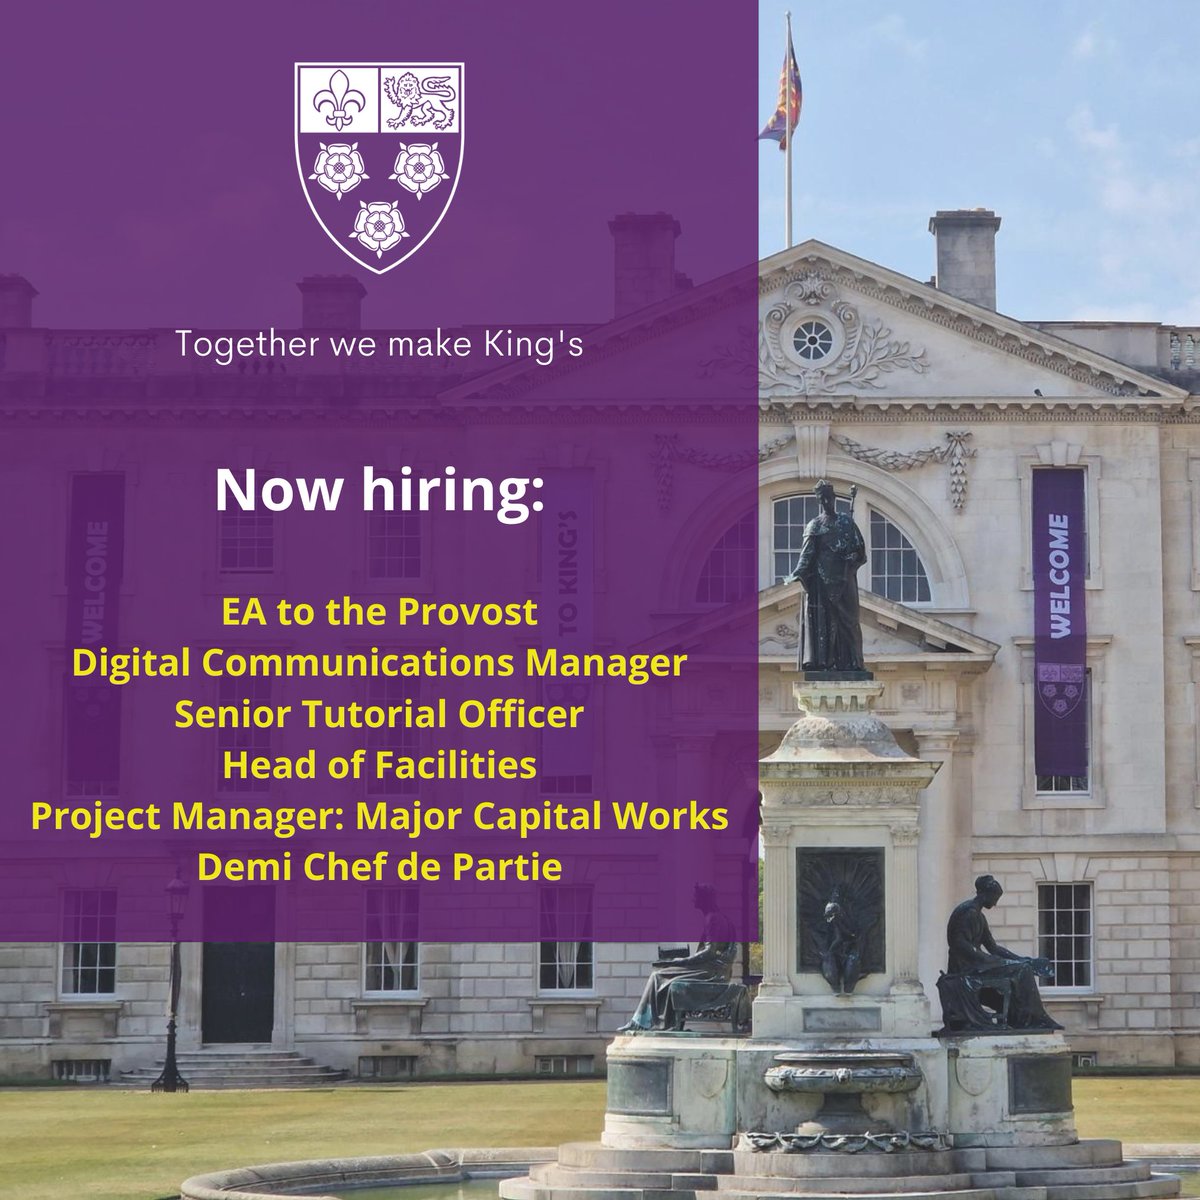 We are #hiring! 👇 Find out more about our current vacancies in various teams at kings.cam.ac.uk/about/work-at-… and join the College at this very exciting time. Together we make King's.